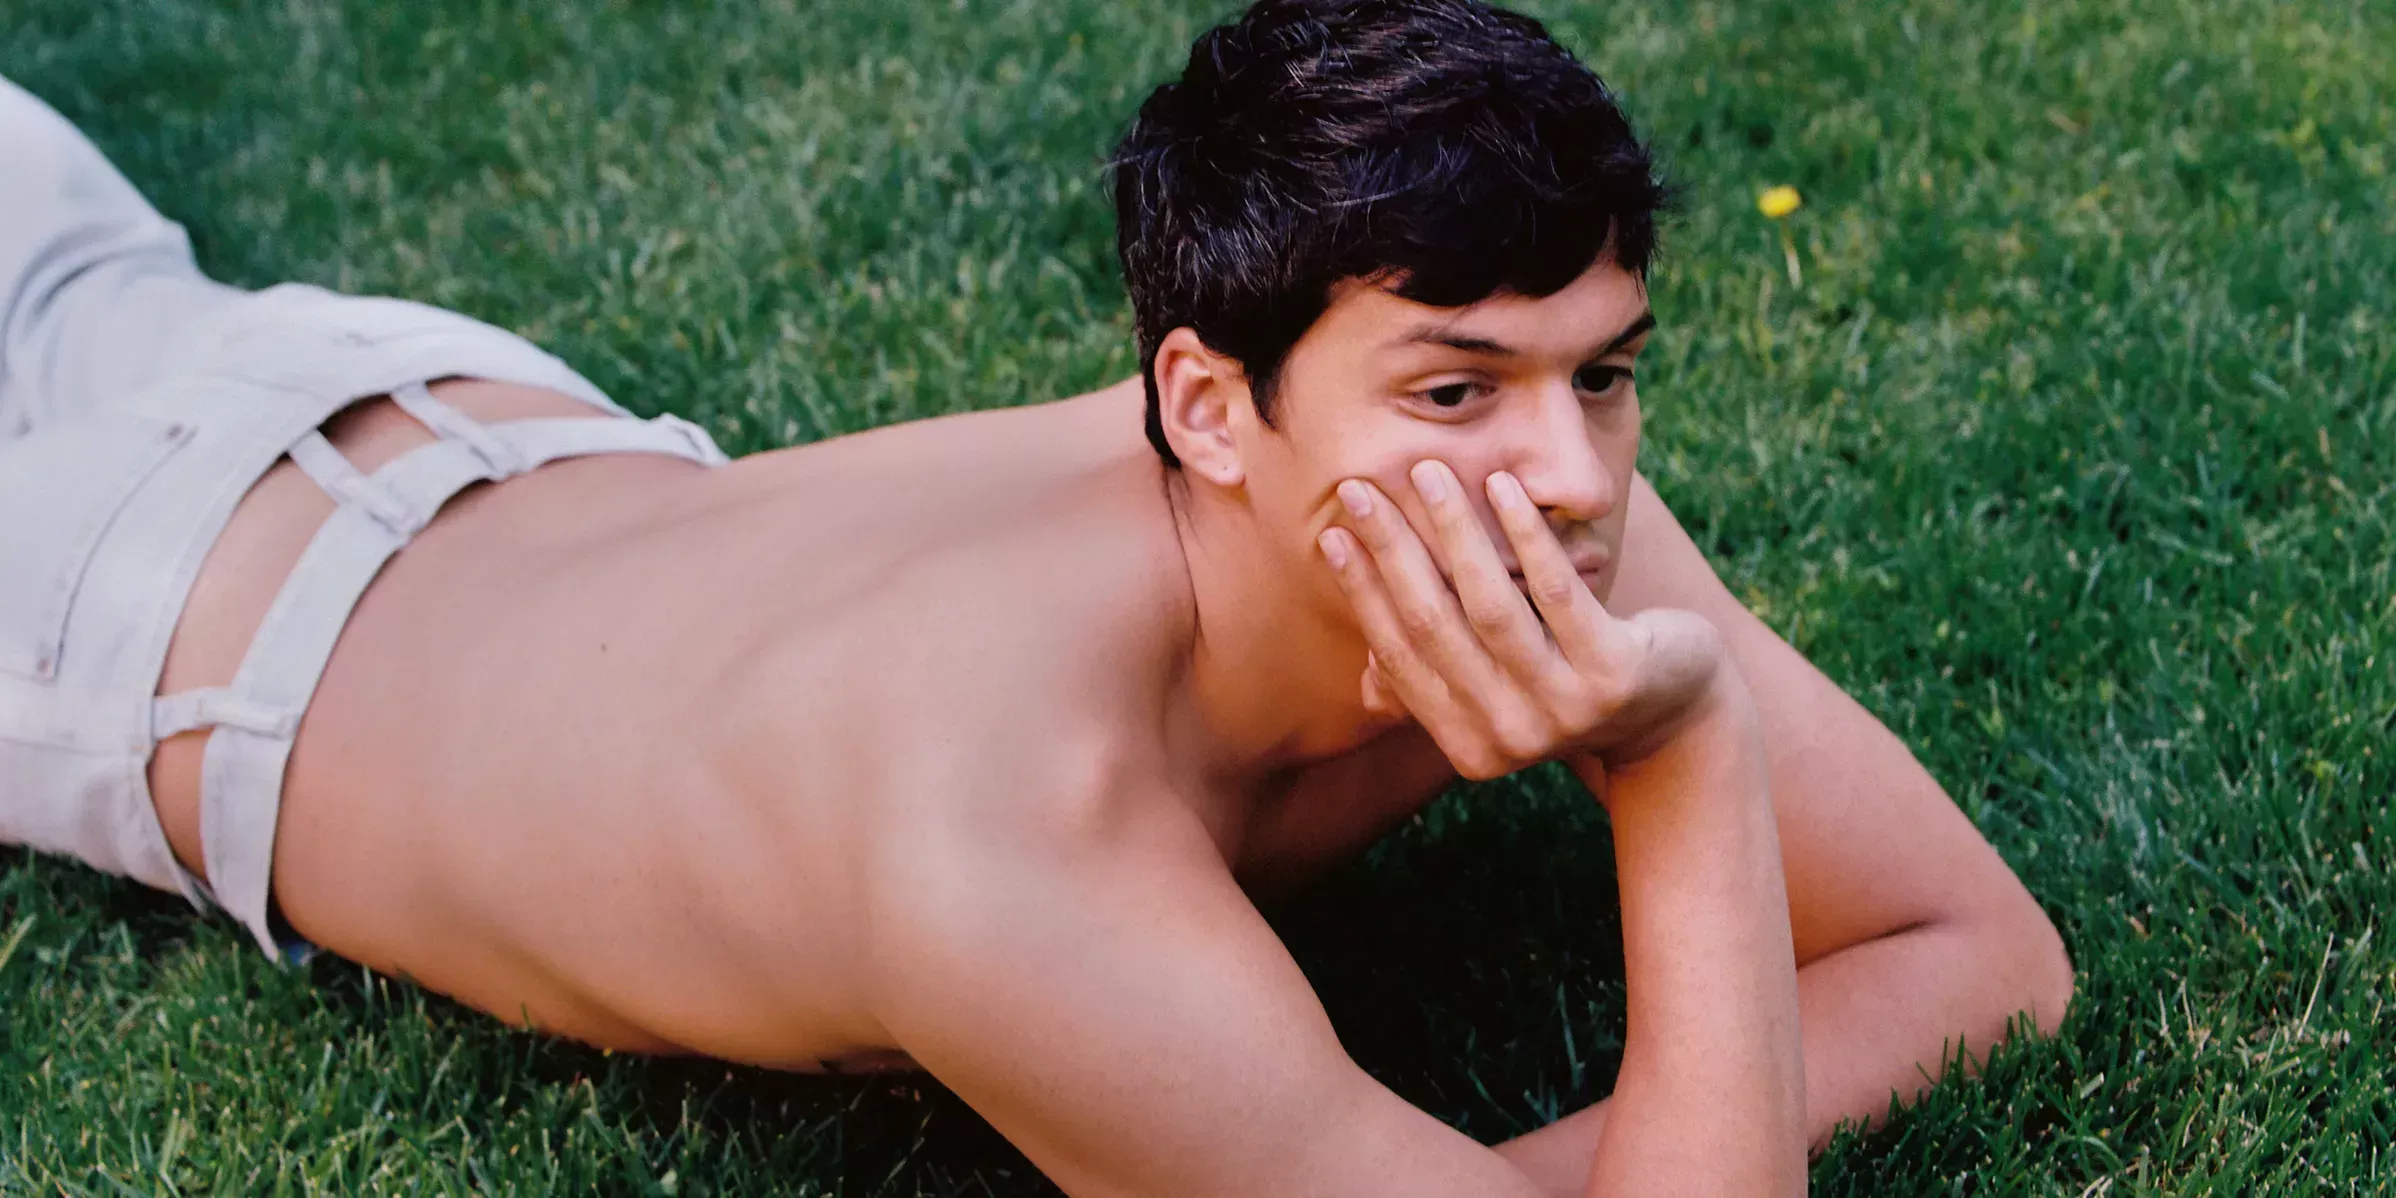 Omar Apollo lying shirtless in a field of grass.